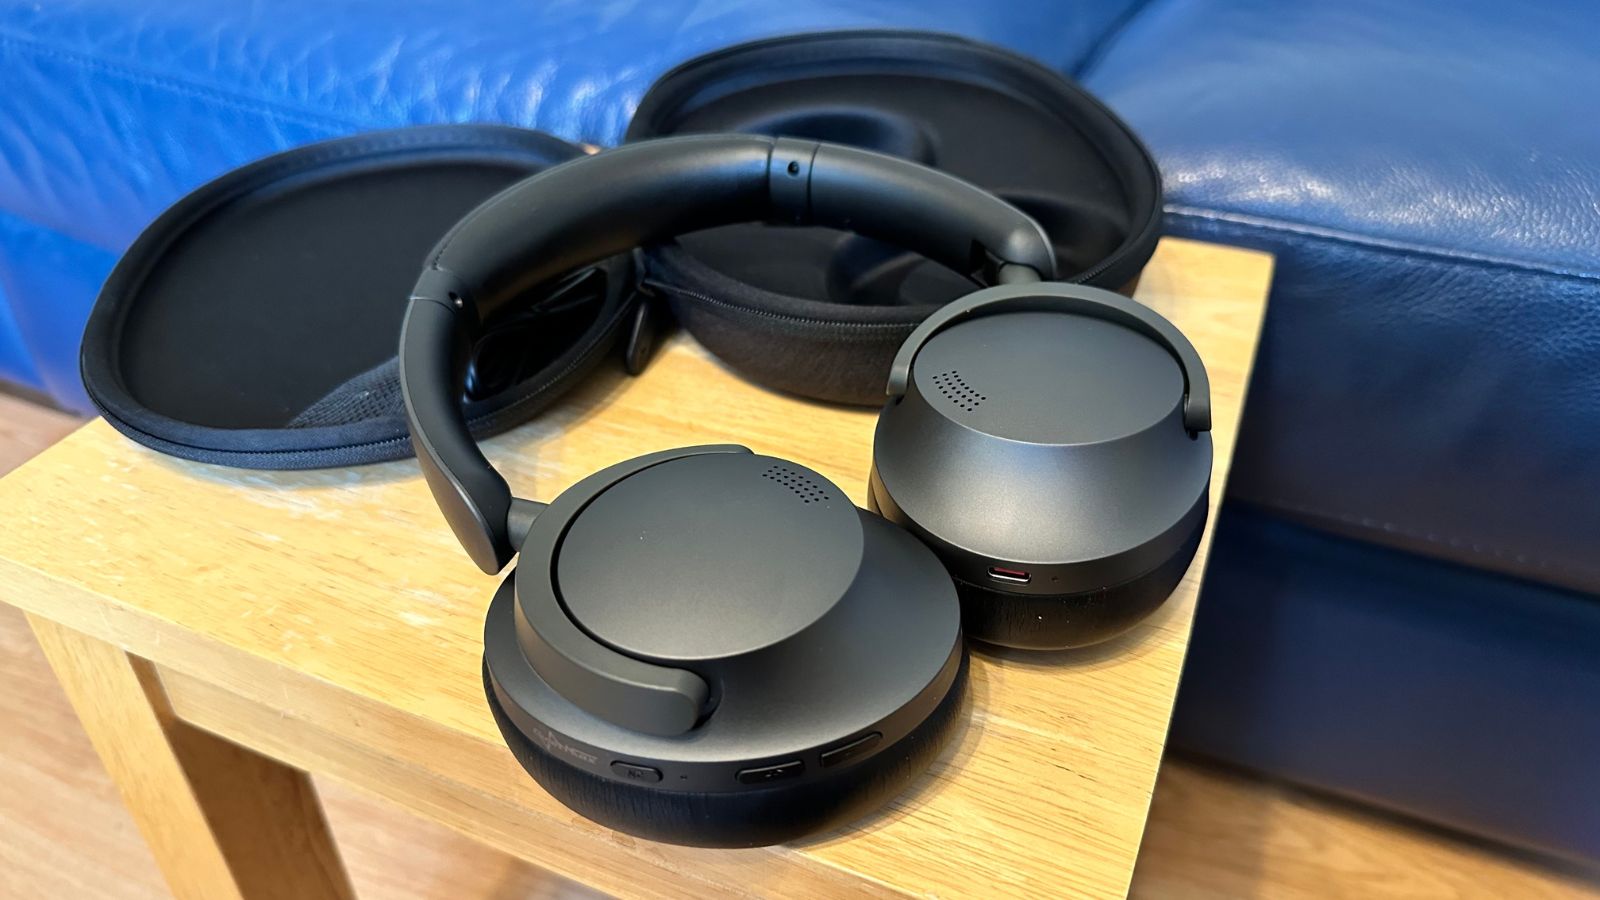 1MORE SonoFlow Review: Great Sound for Days on End